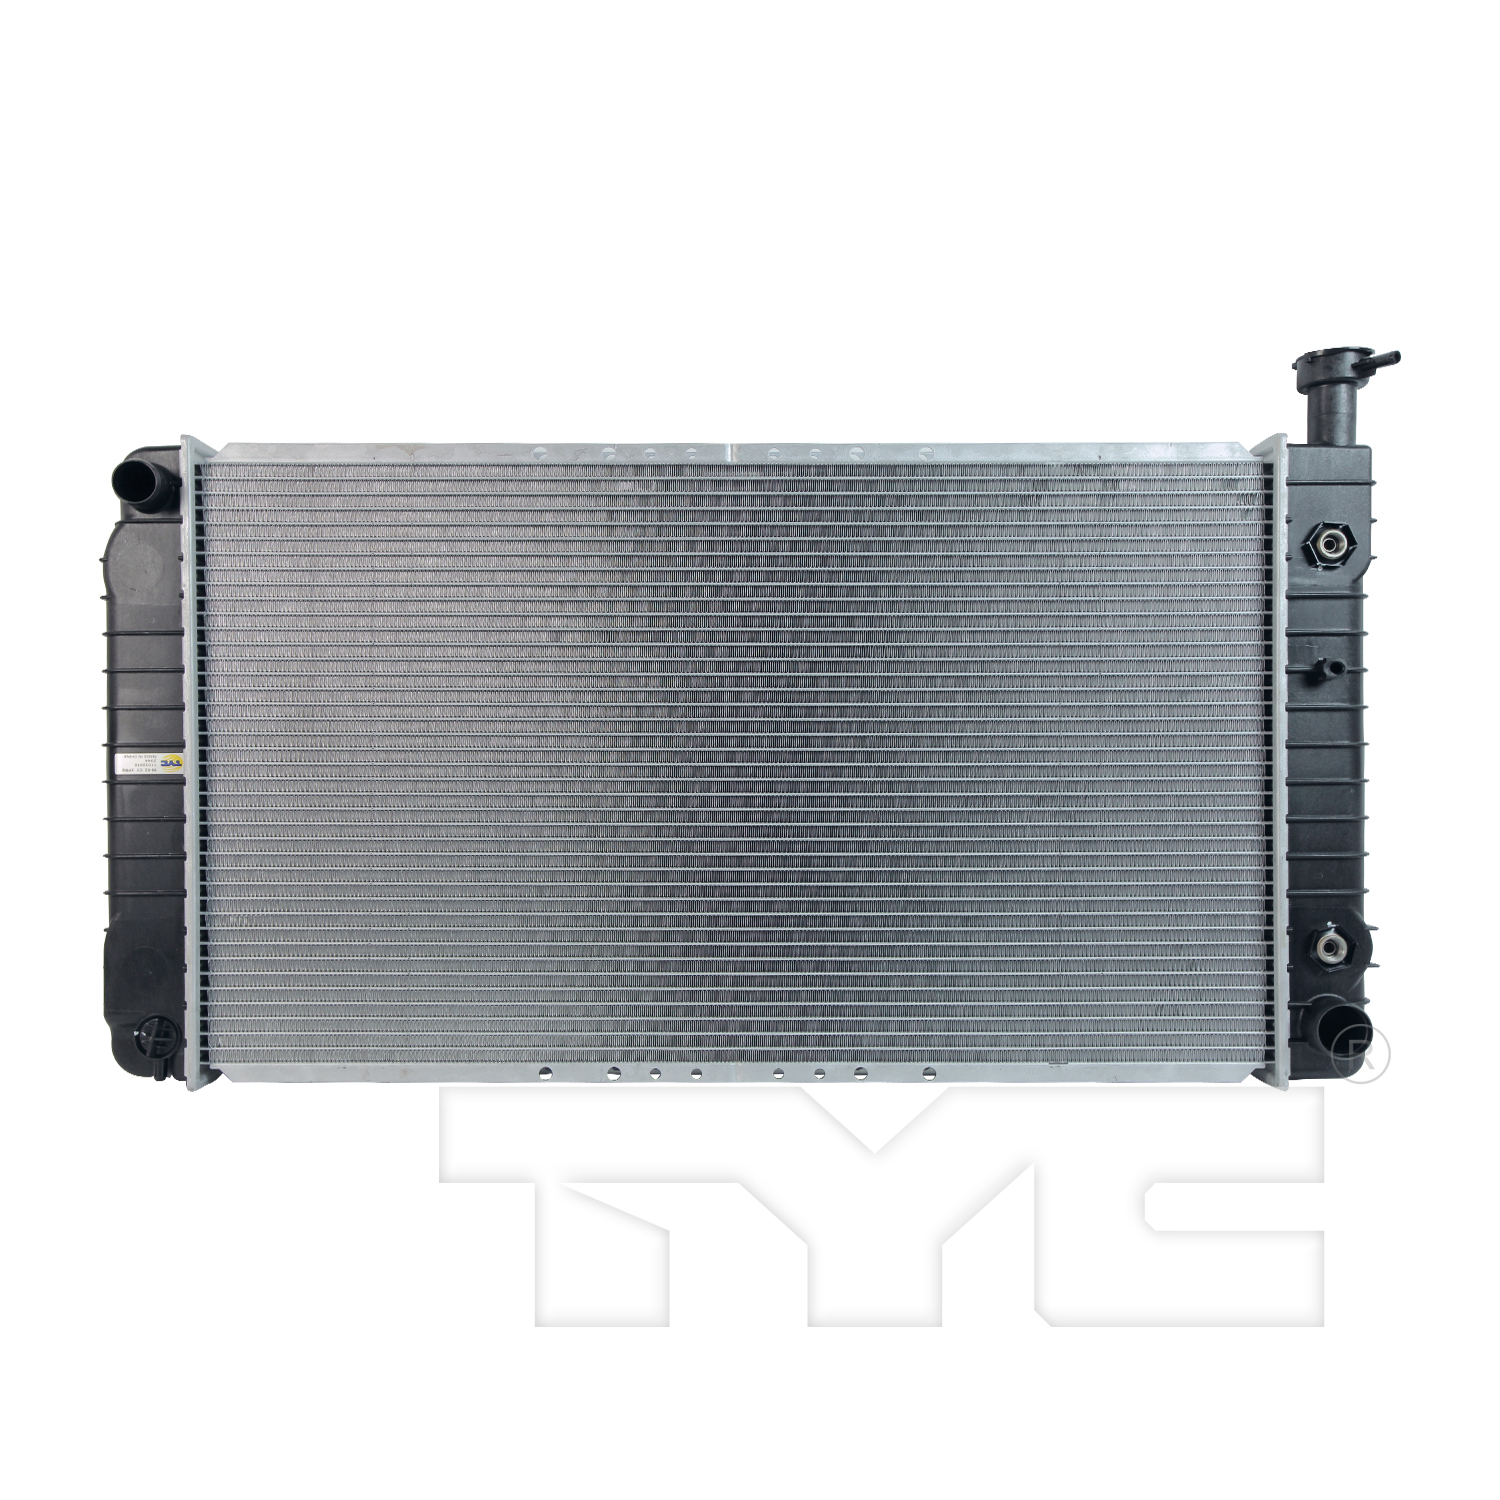 Aftermarket RADIATORS for CHEVROLET - EXPRESS 1500, EXPRESS 1500,96-96,Radiator assembly